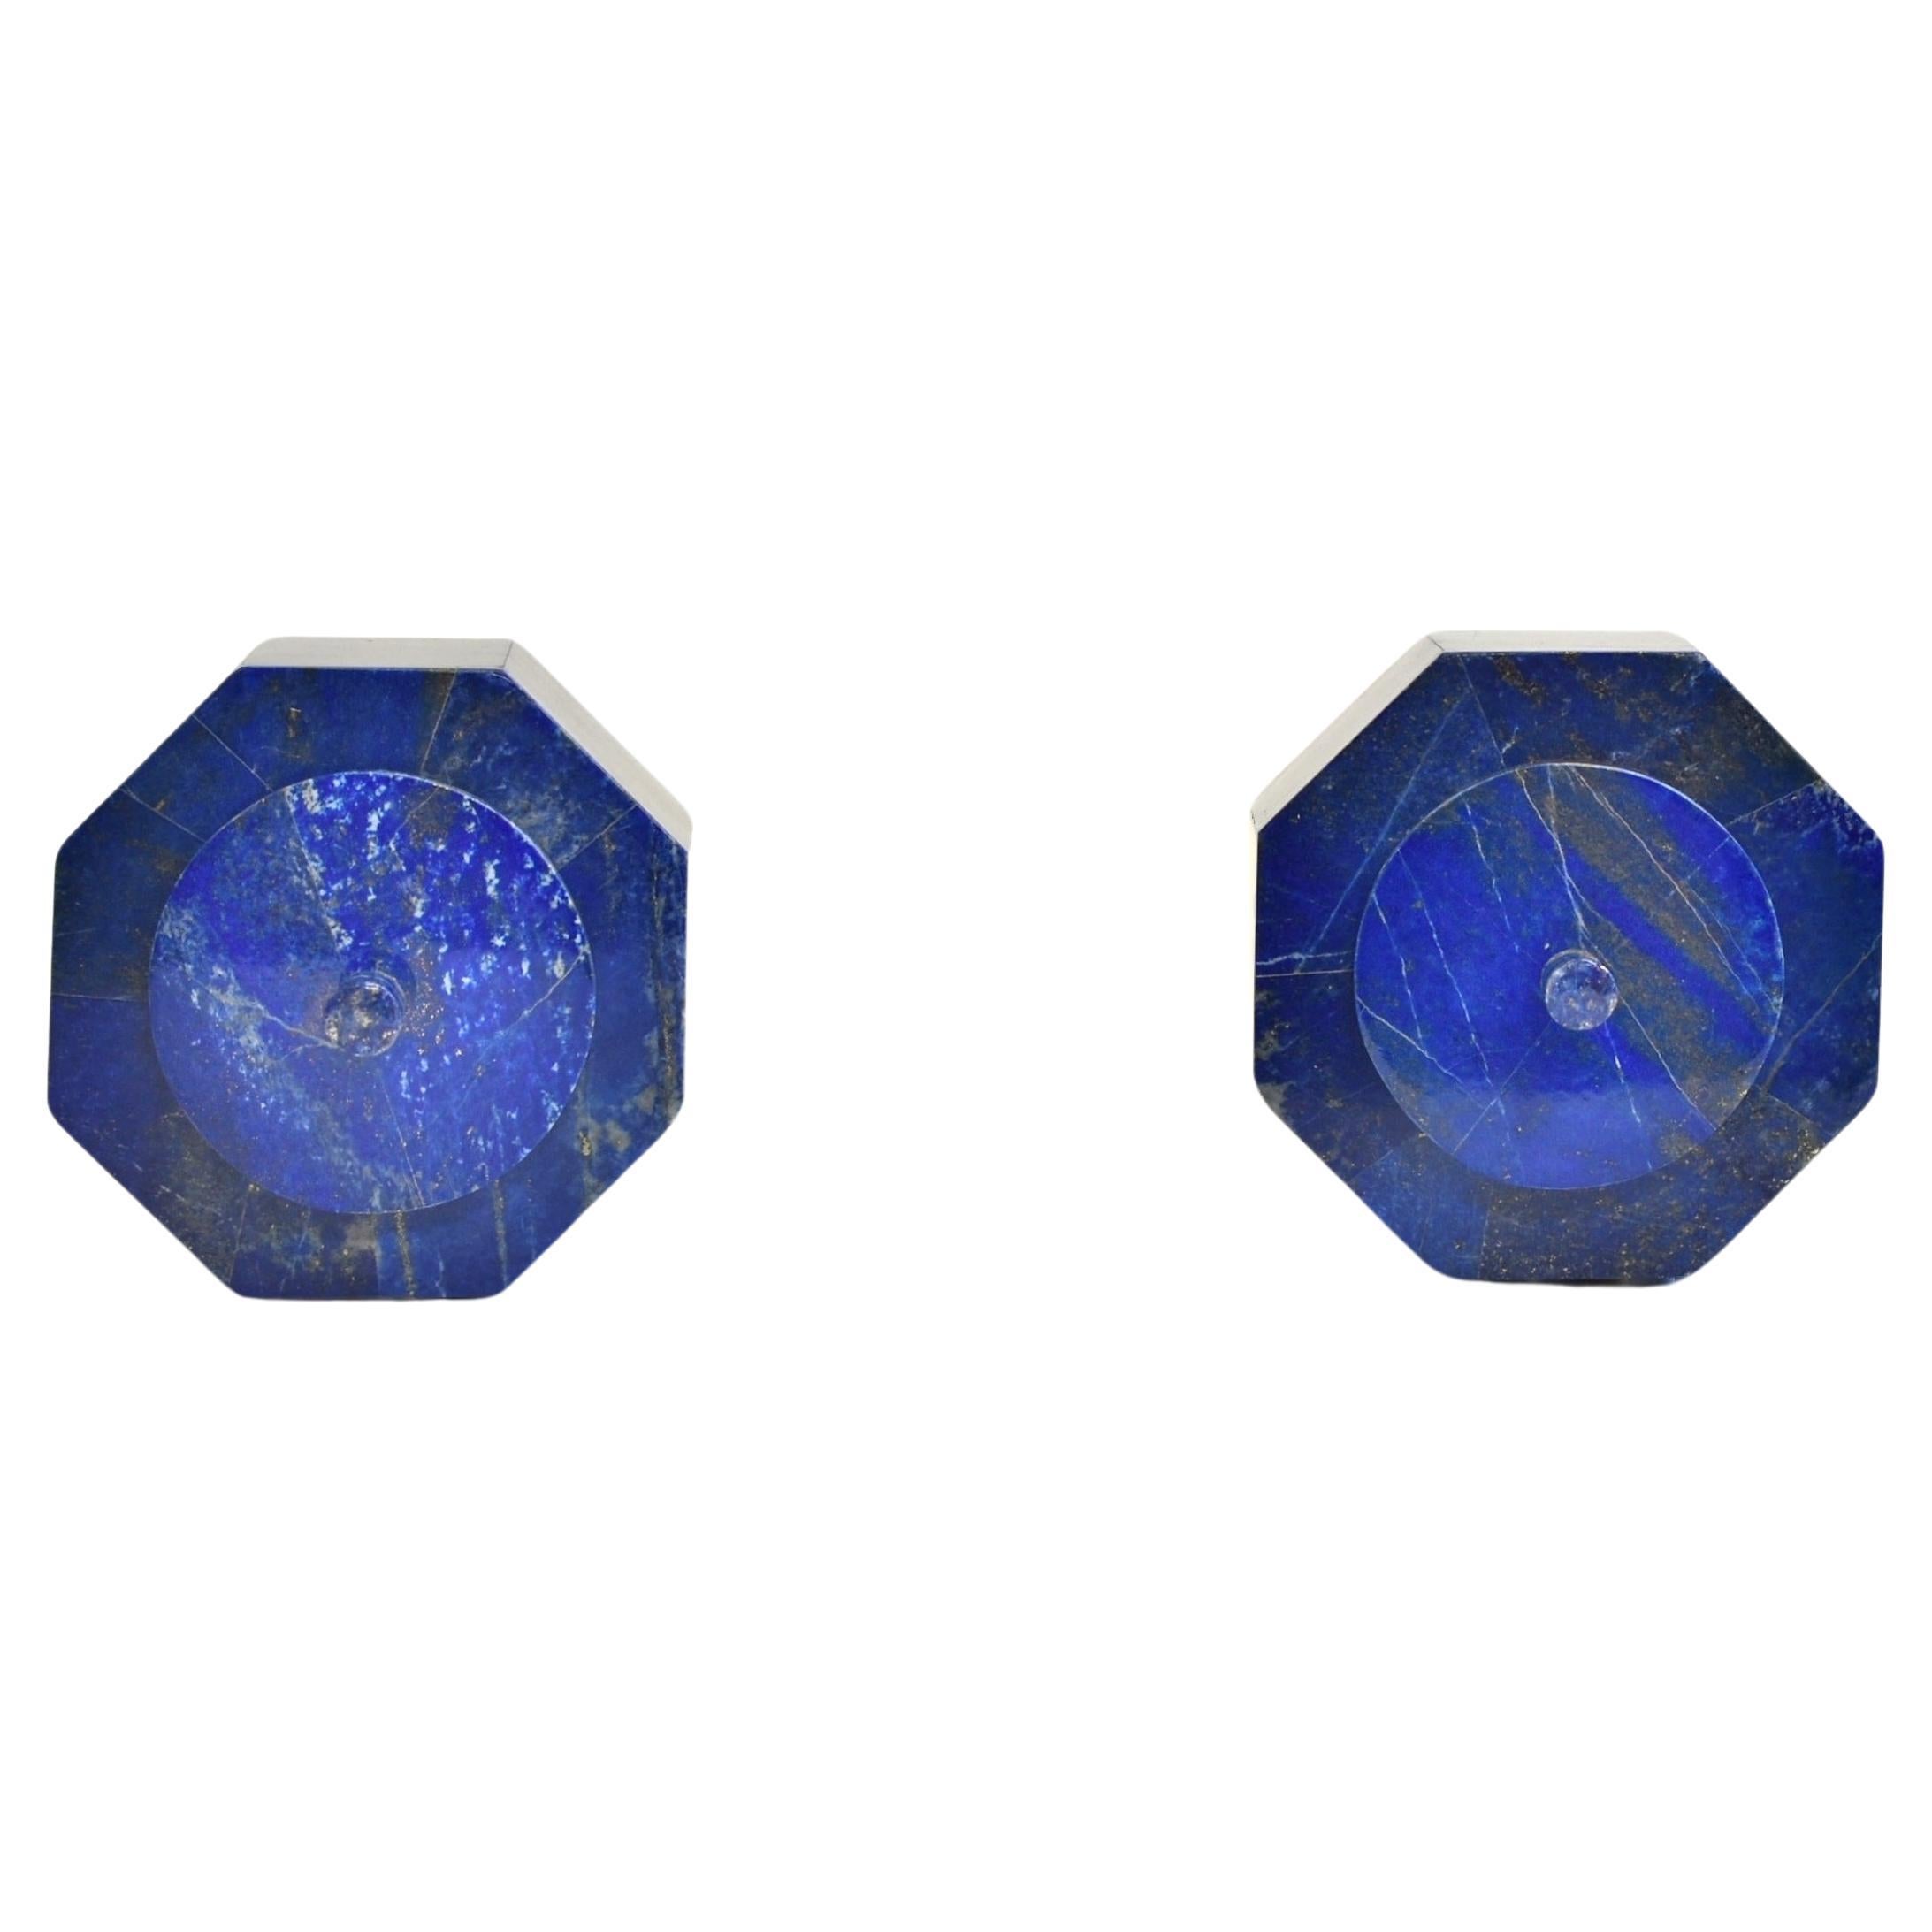 Pair Lapis Lazuli Octagonal Boxes 4" Fine Grade AAA For Sale